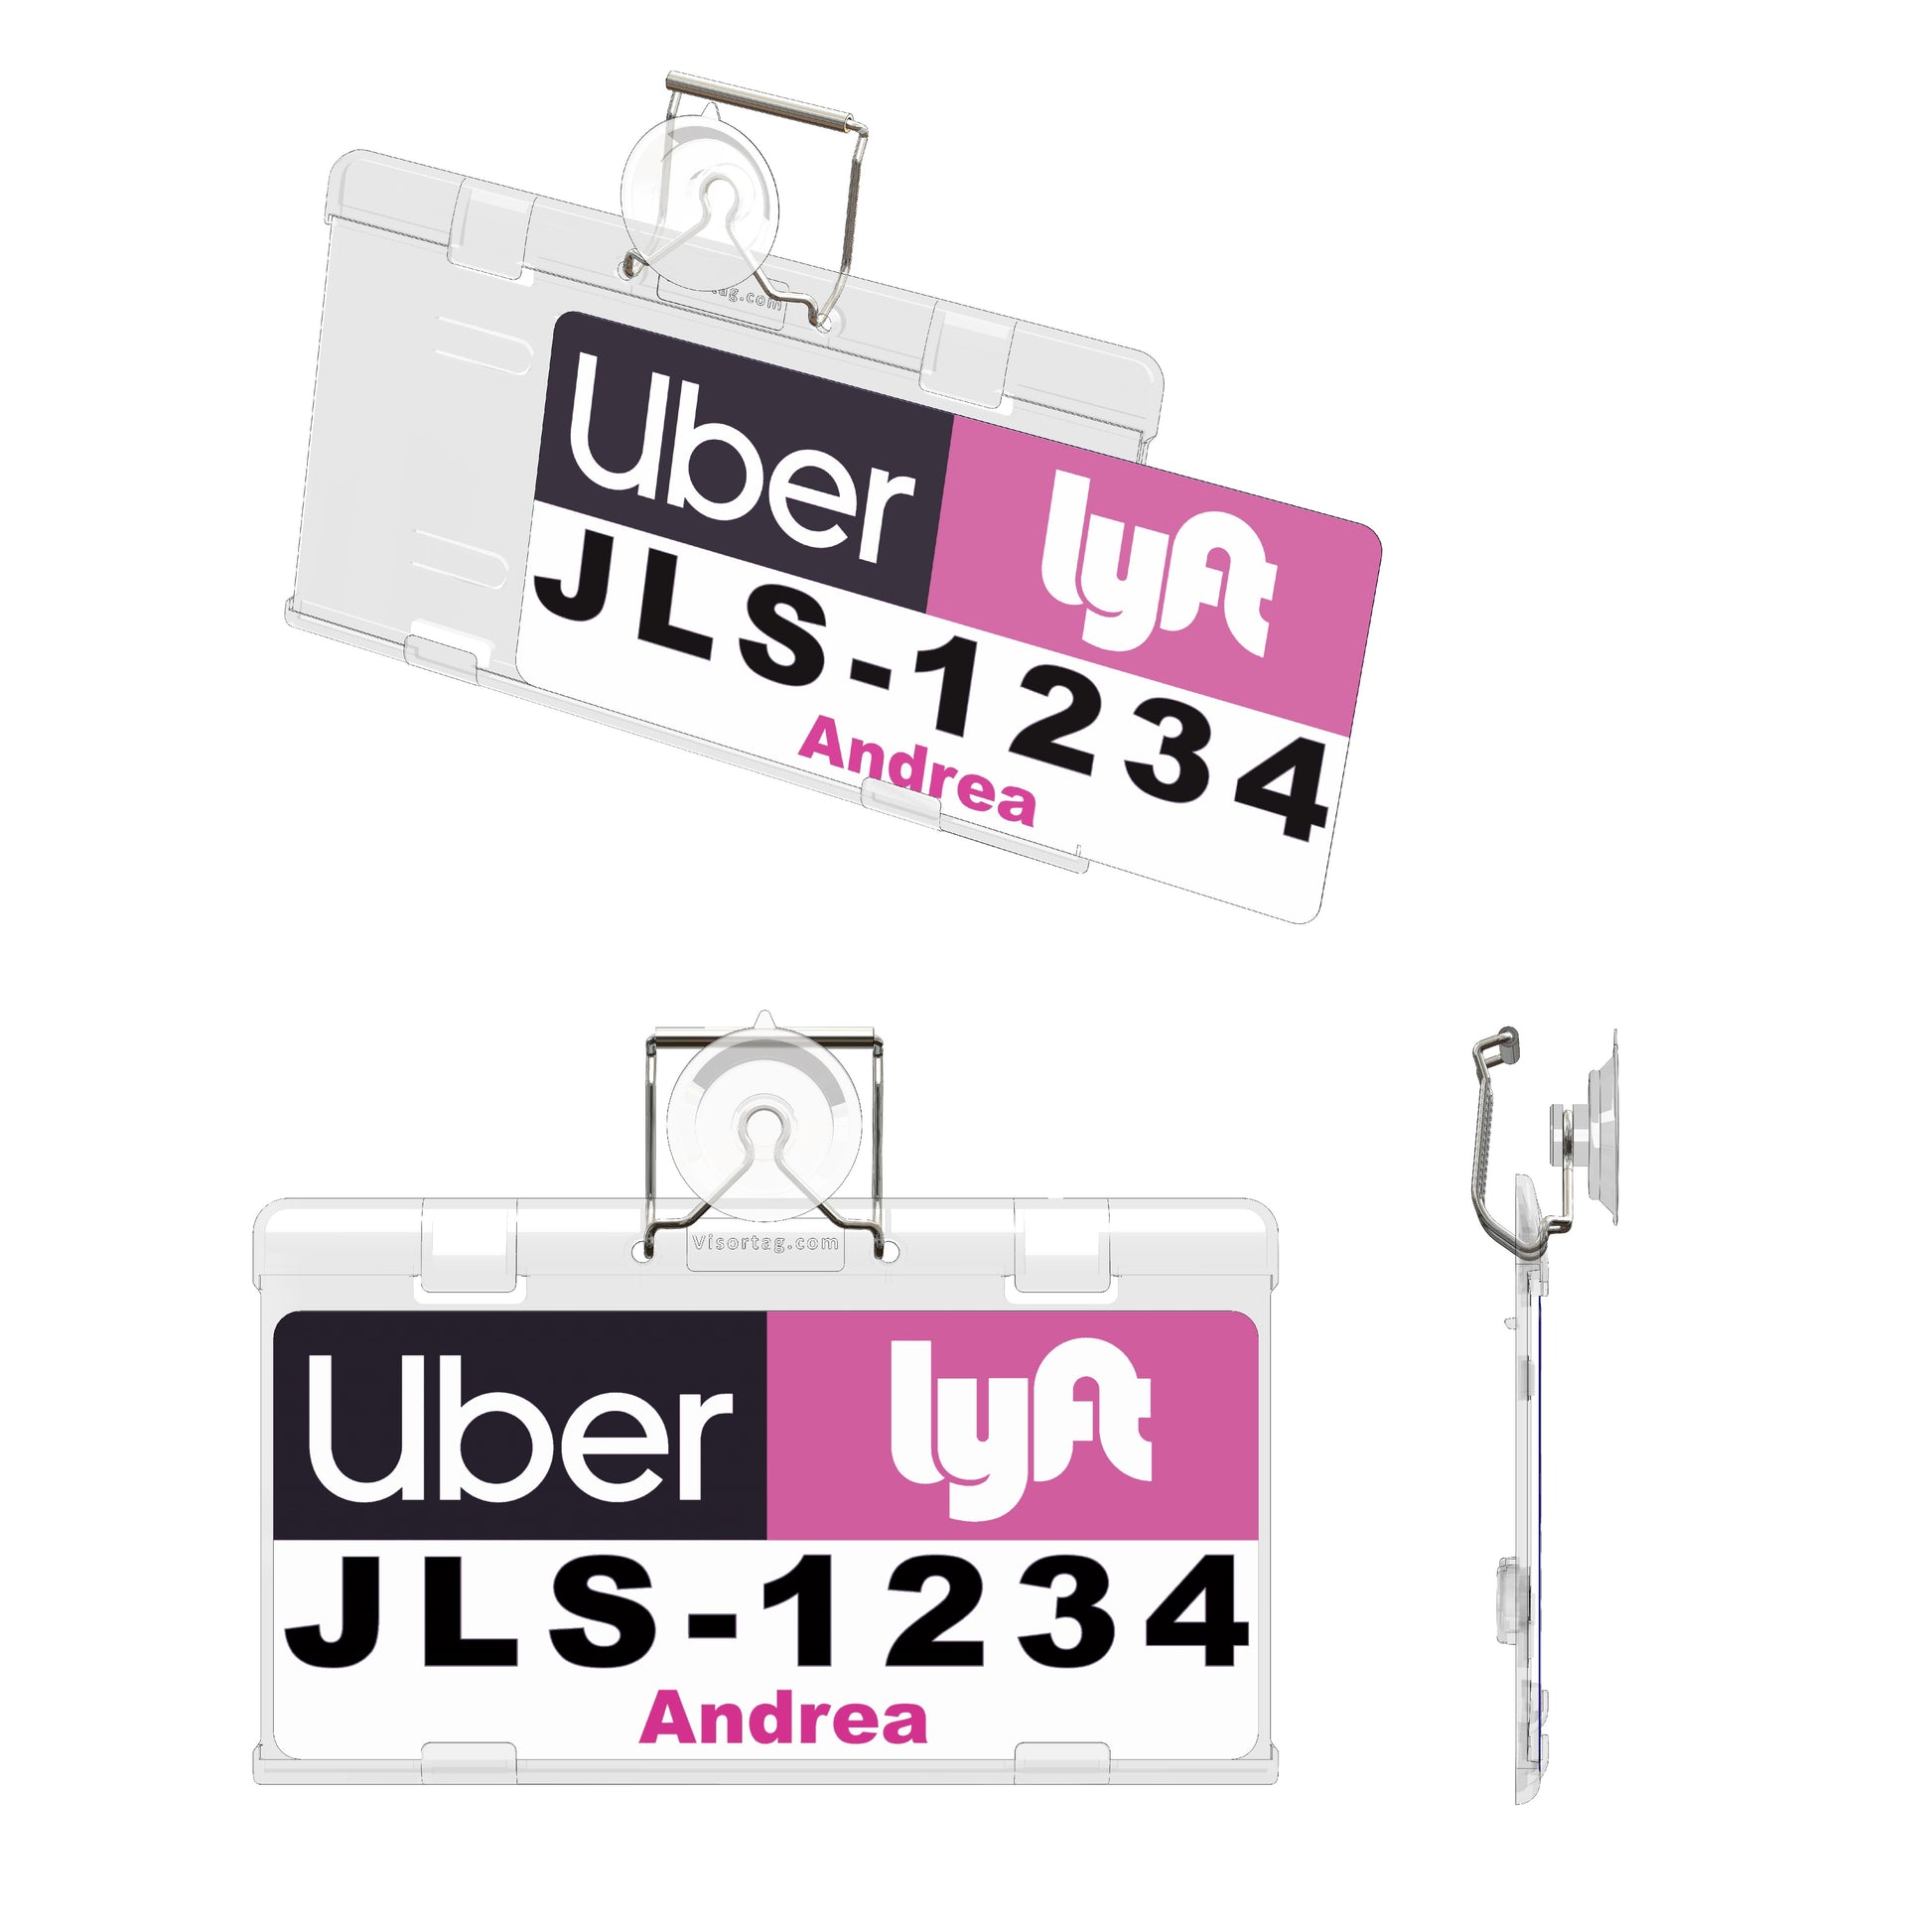 Uber and Lyft sign holder and protector image how to insert window car sign into holder